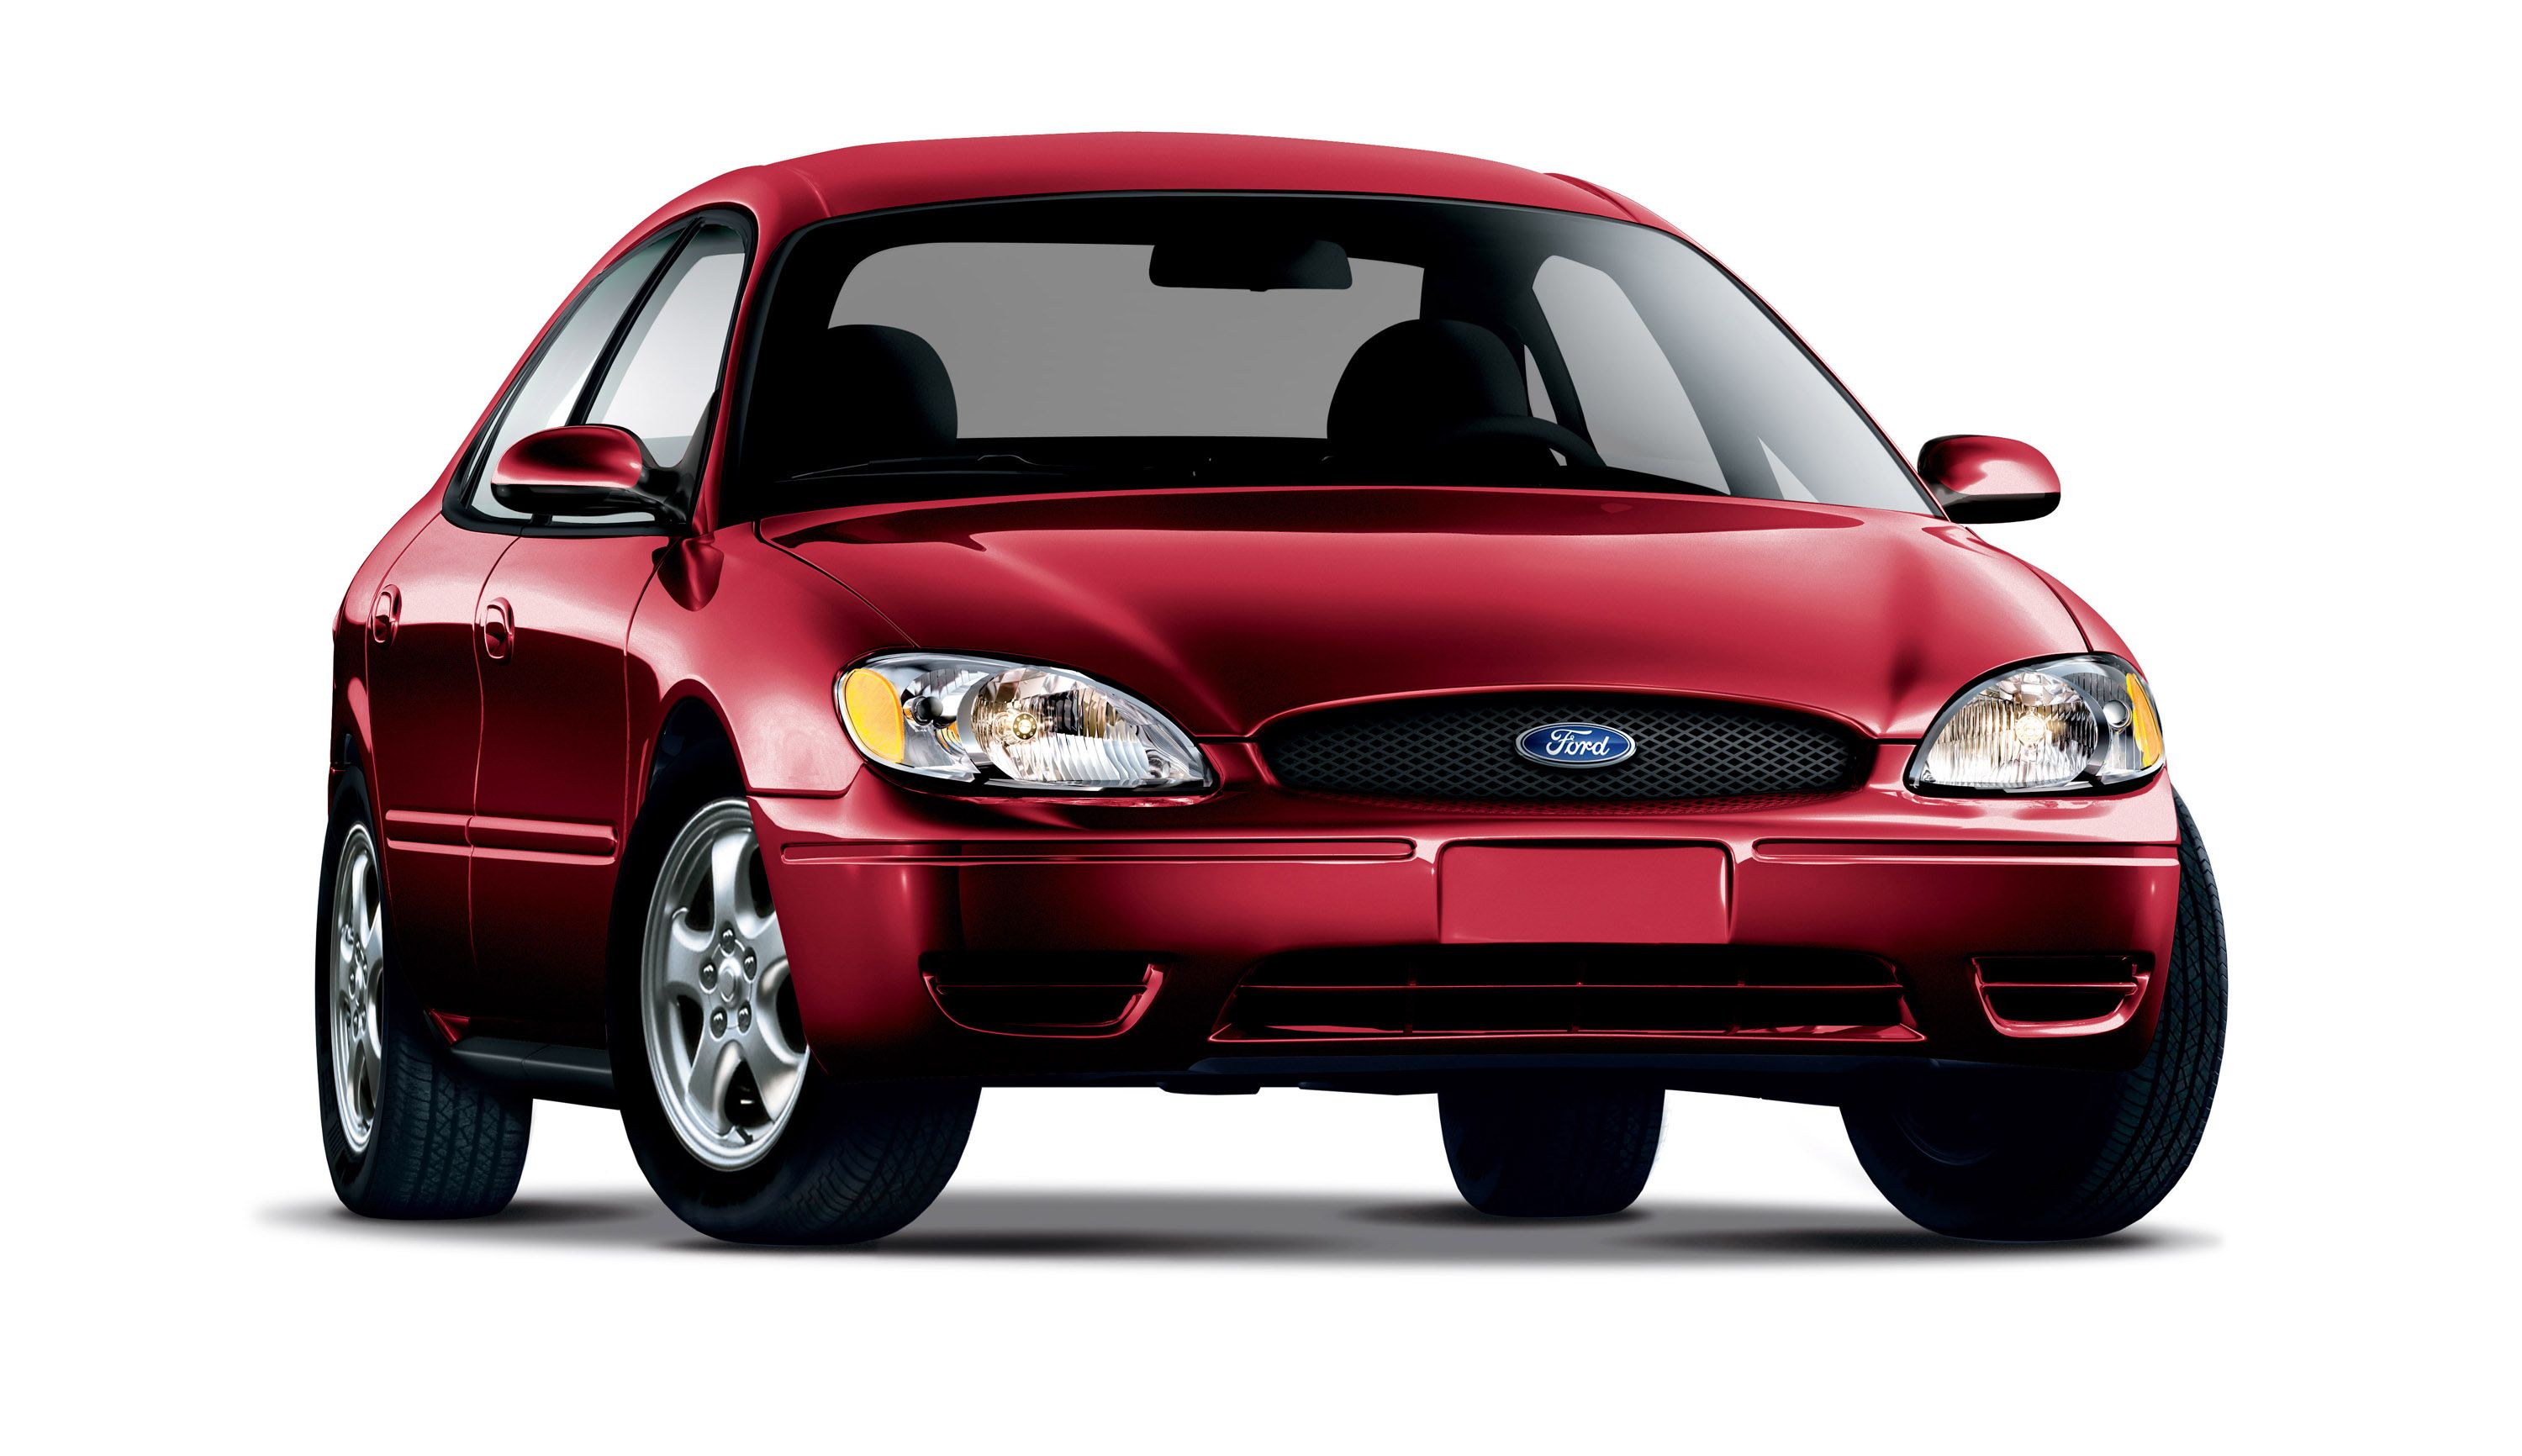 2008 Ford Taurus replacing the Five Hundred